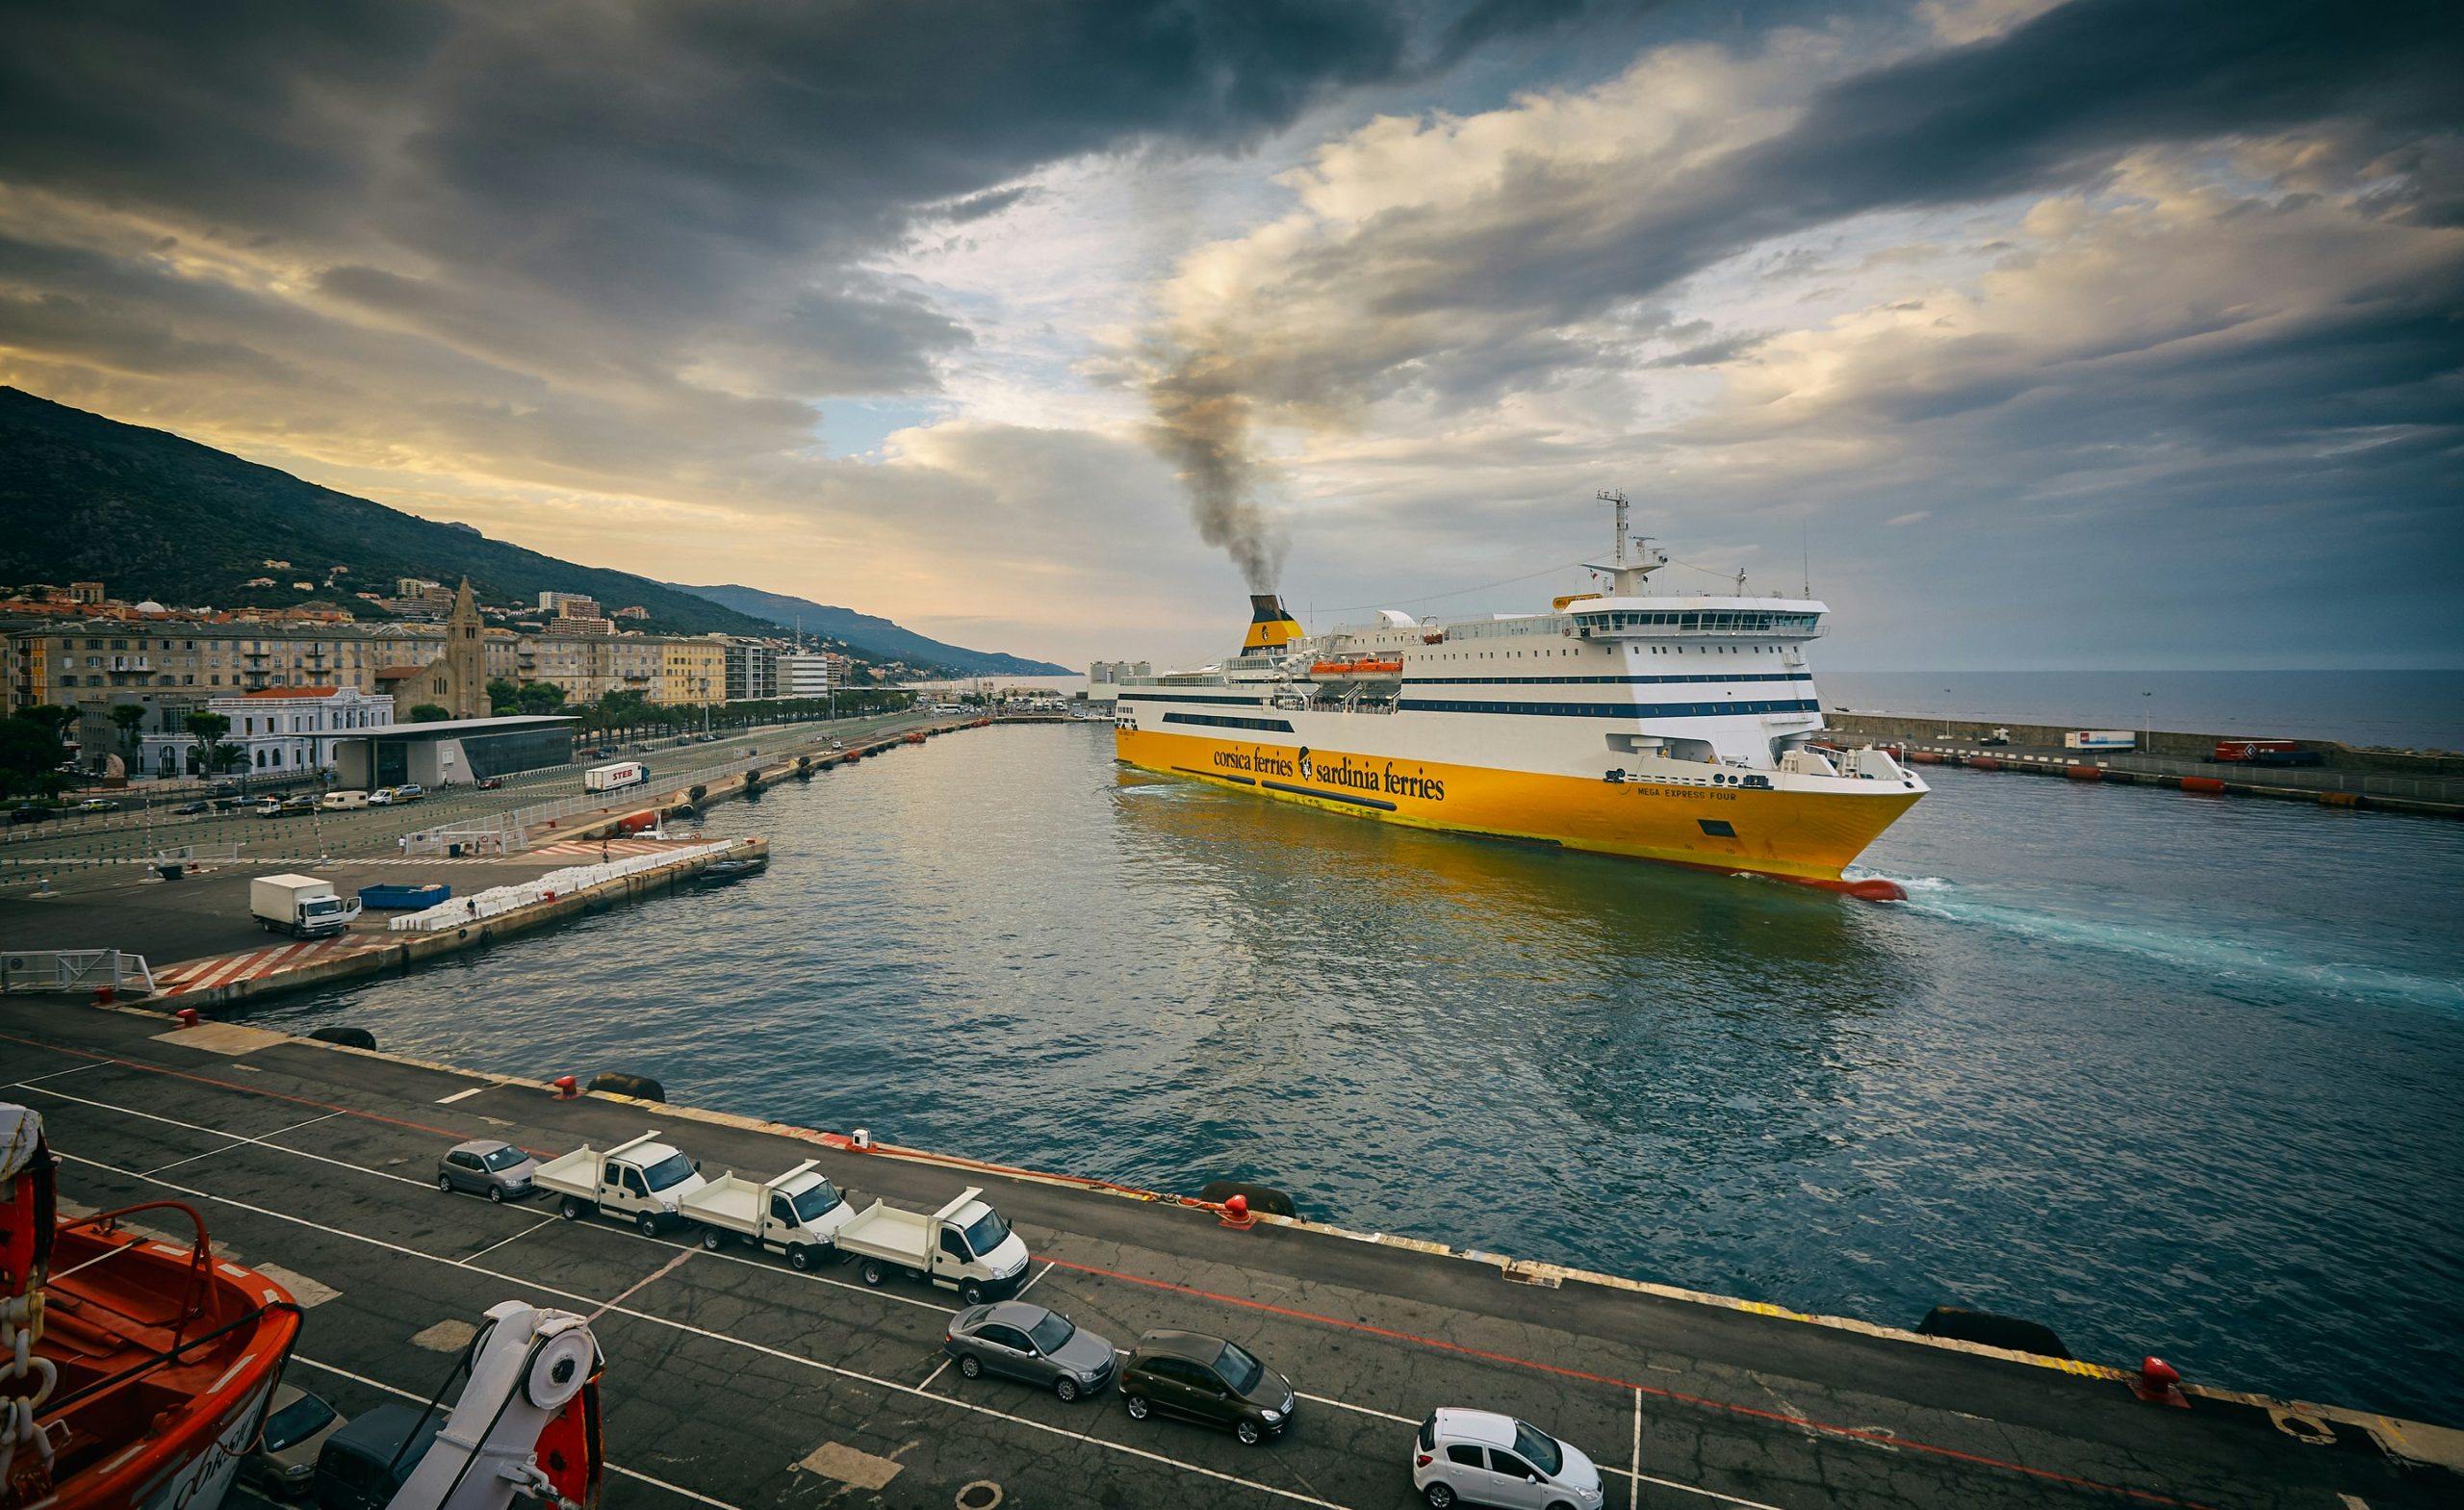 experience unforgettable greek ferry adventures with stunning sea views and authentic island hopping opportunities.